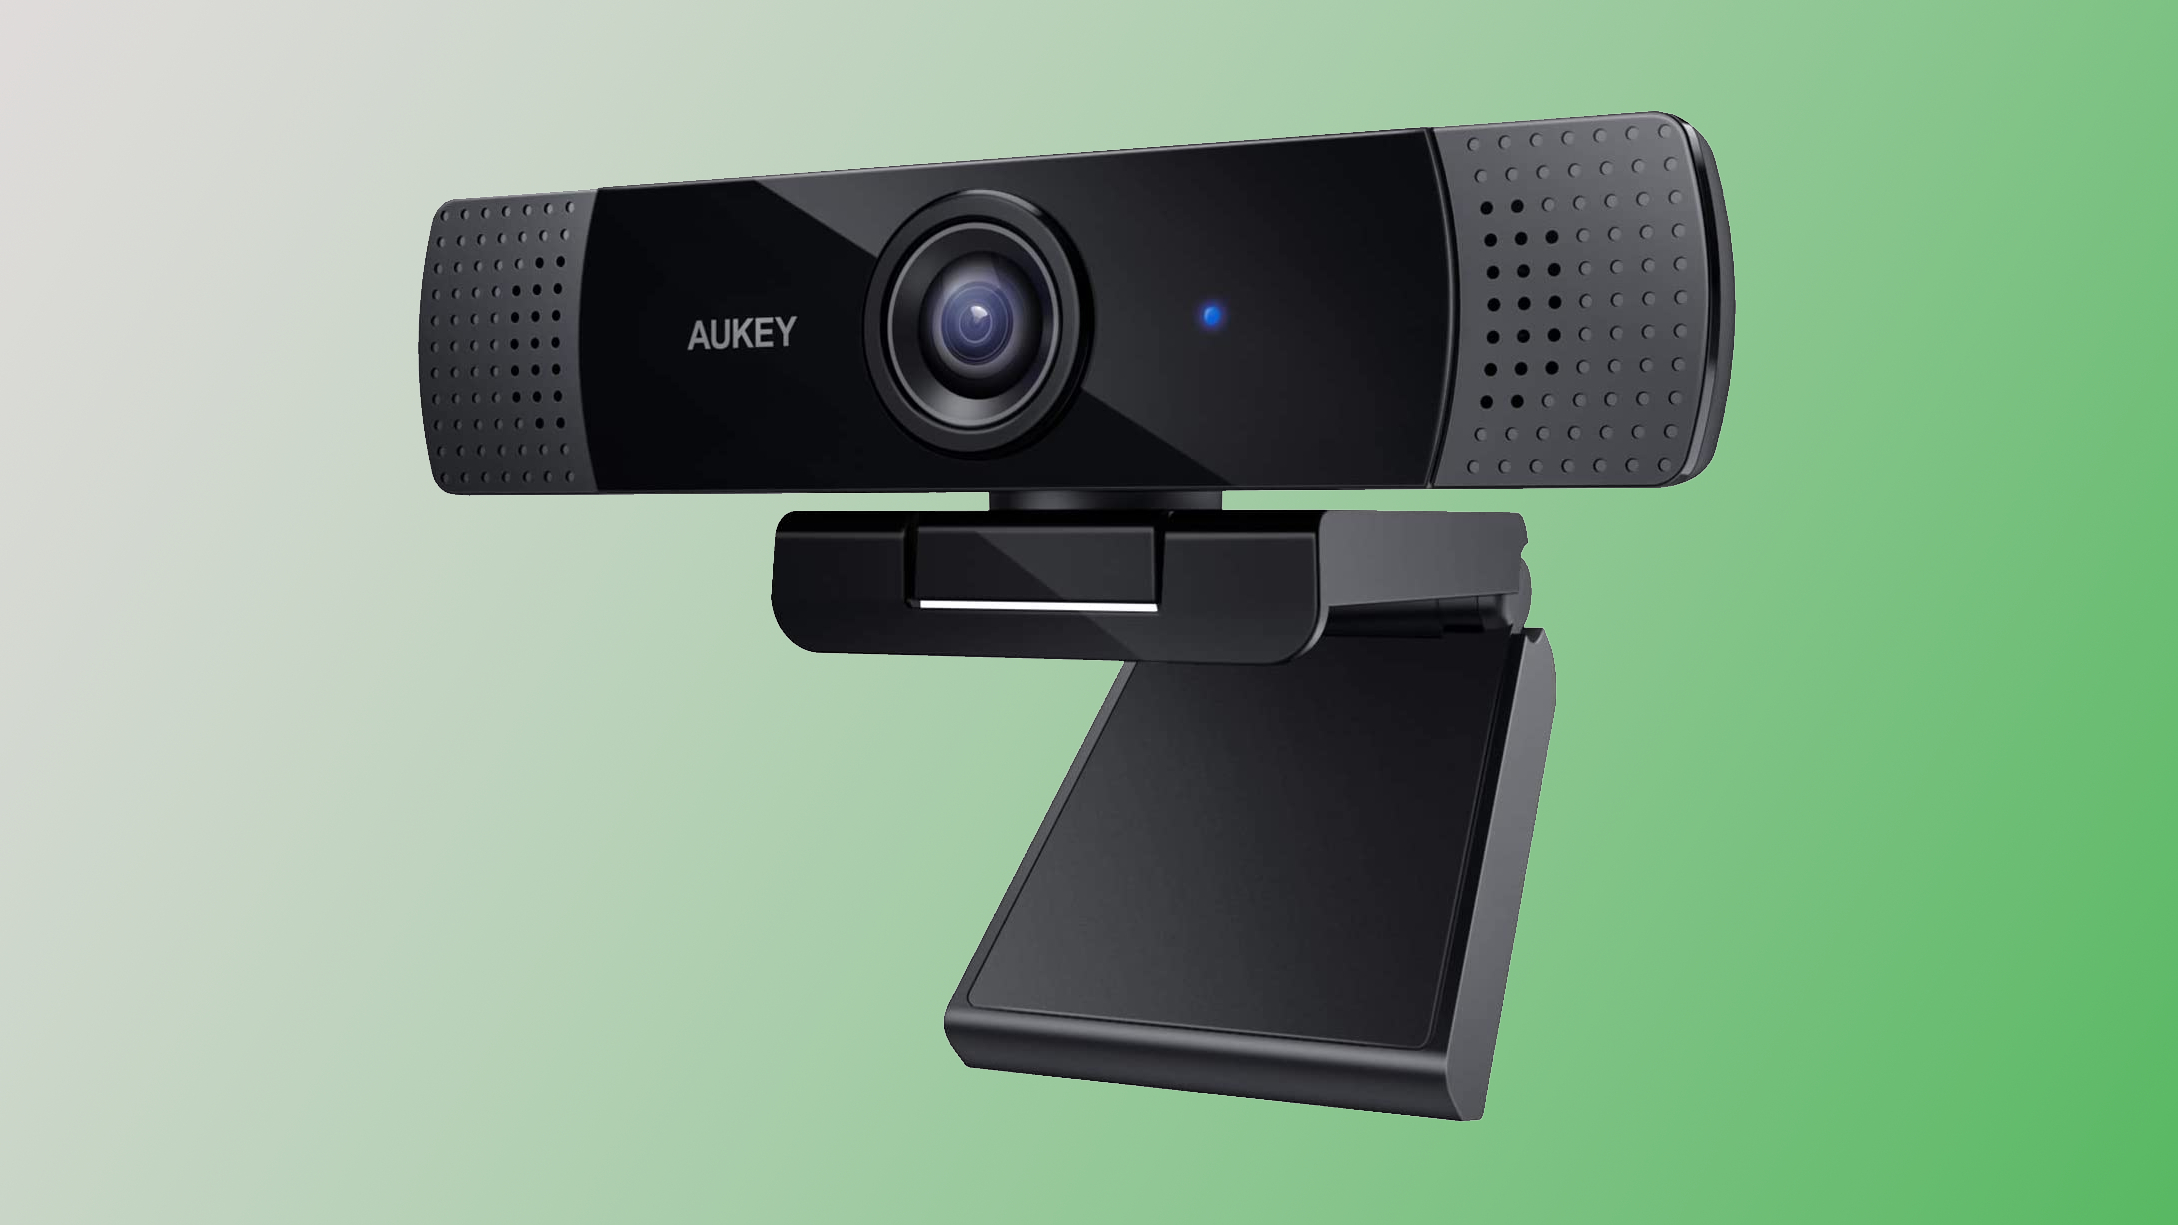 This $29 Webcam Almost as Good as a Logitech C920 | Tom's Hardware